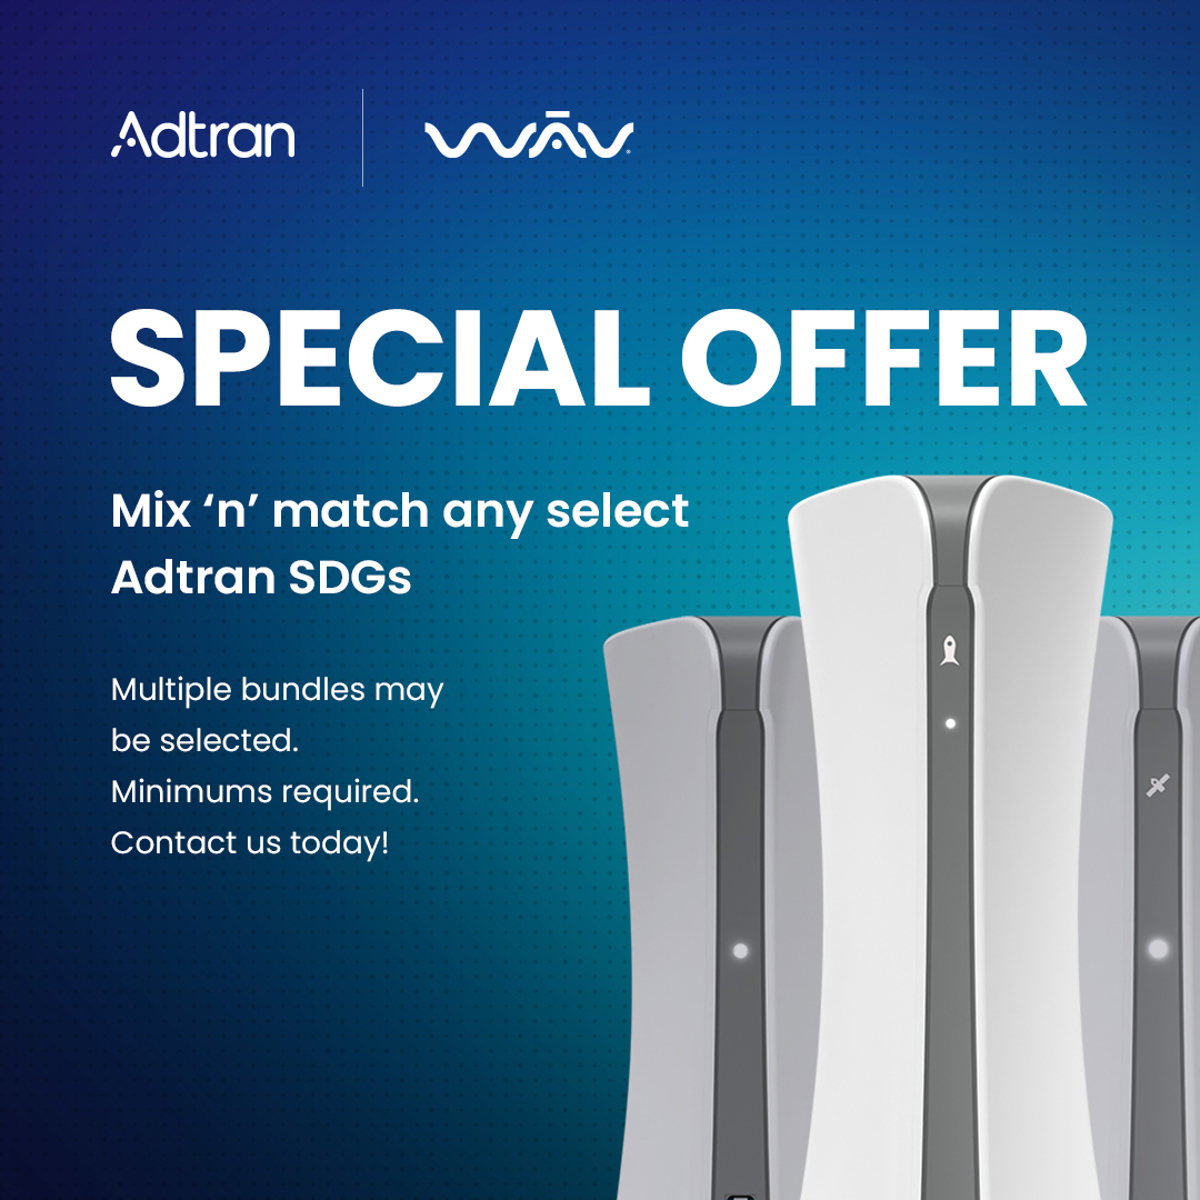 Special offer: Mix ‘n’ match any select Adtran SDGs